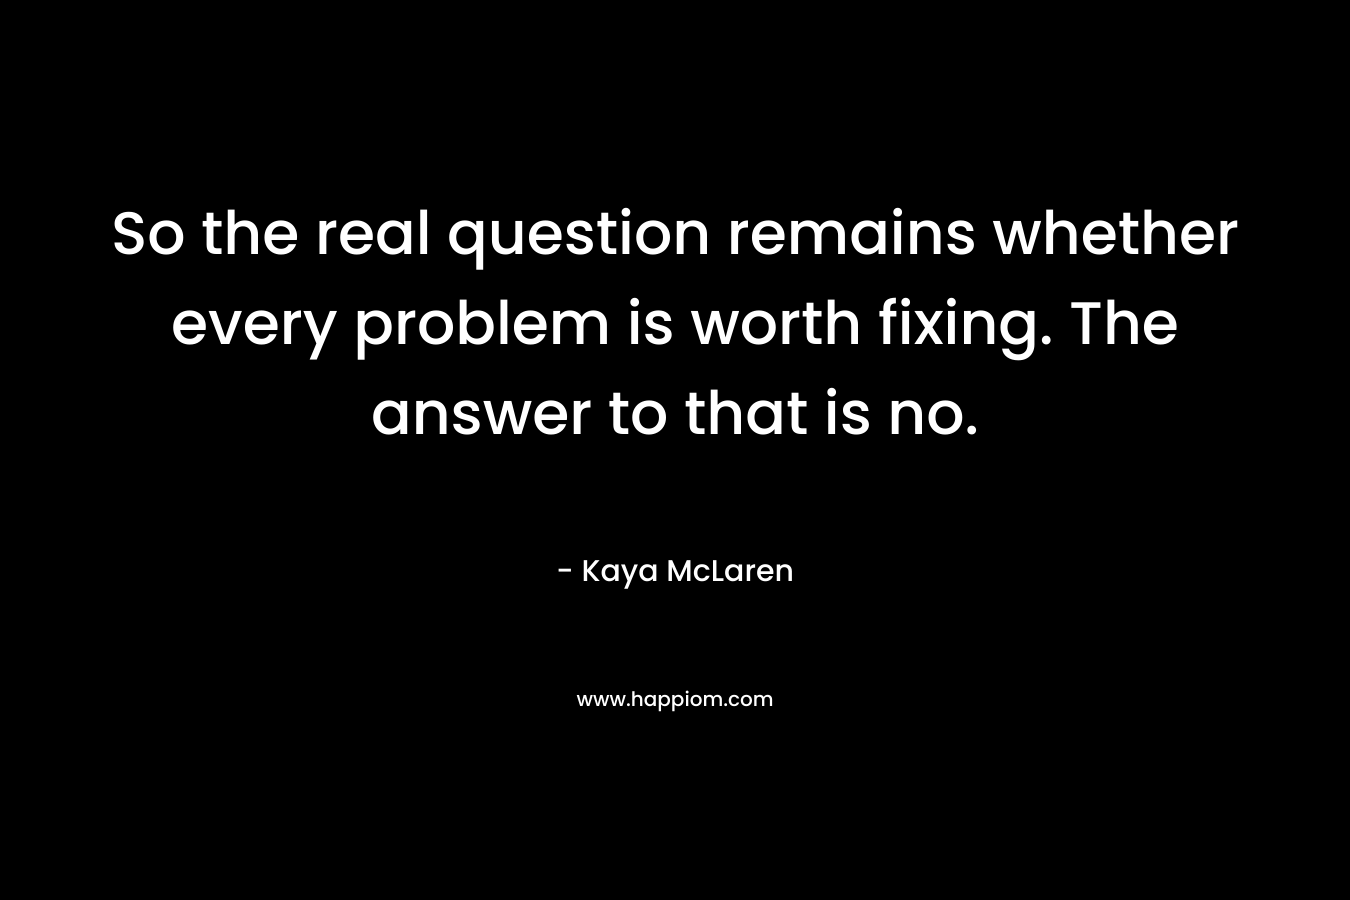 So the real question remains whether every problem is worth fixing. The answer to that is no. – Kaya McLaren